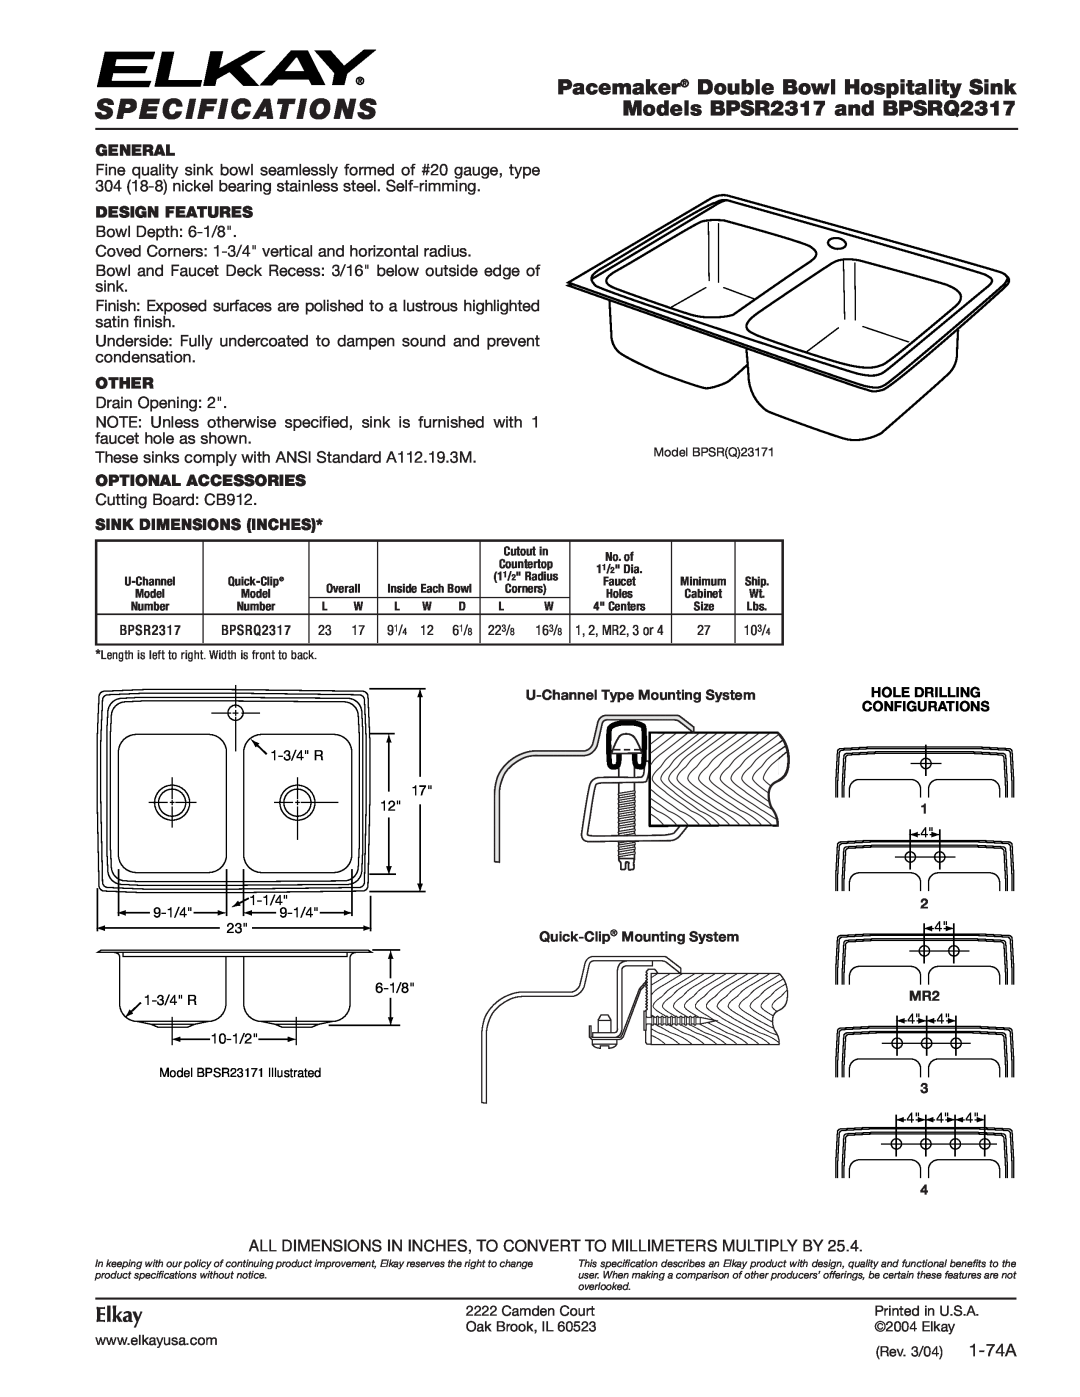 Elkay BPSR23171 specifications Specifications, Pacemaker Double Bowl Hospitality Sink, Models BPSR2317 and BPSRQ2317 